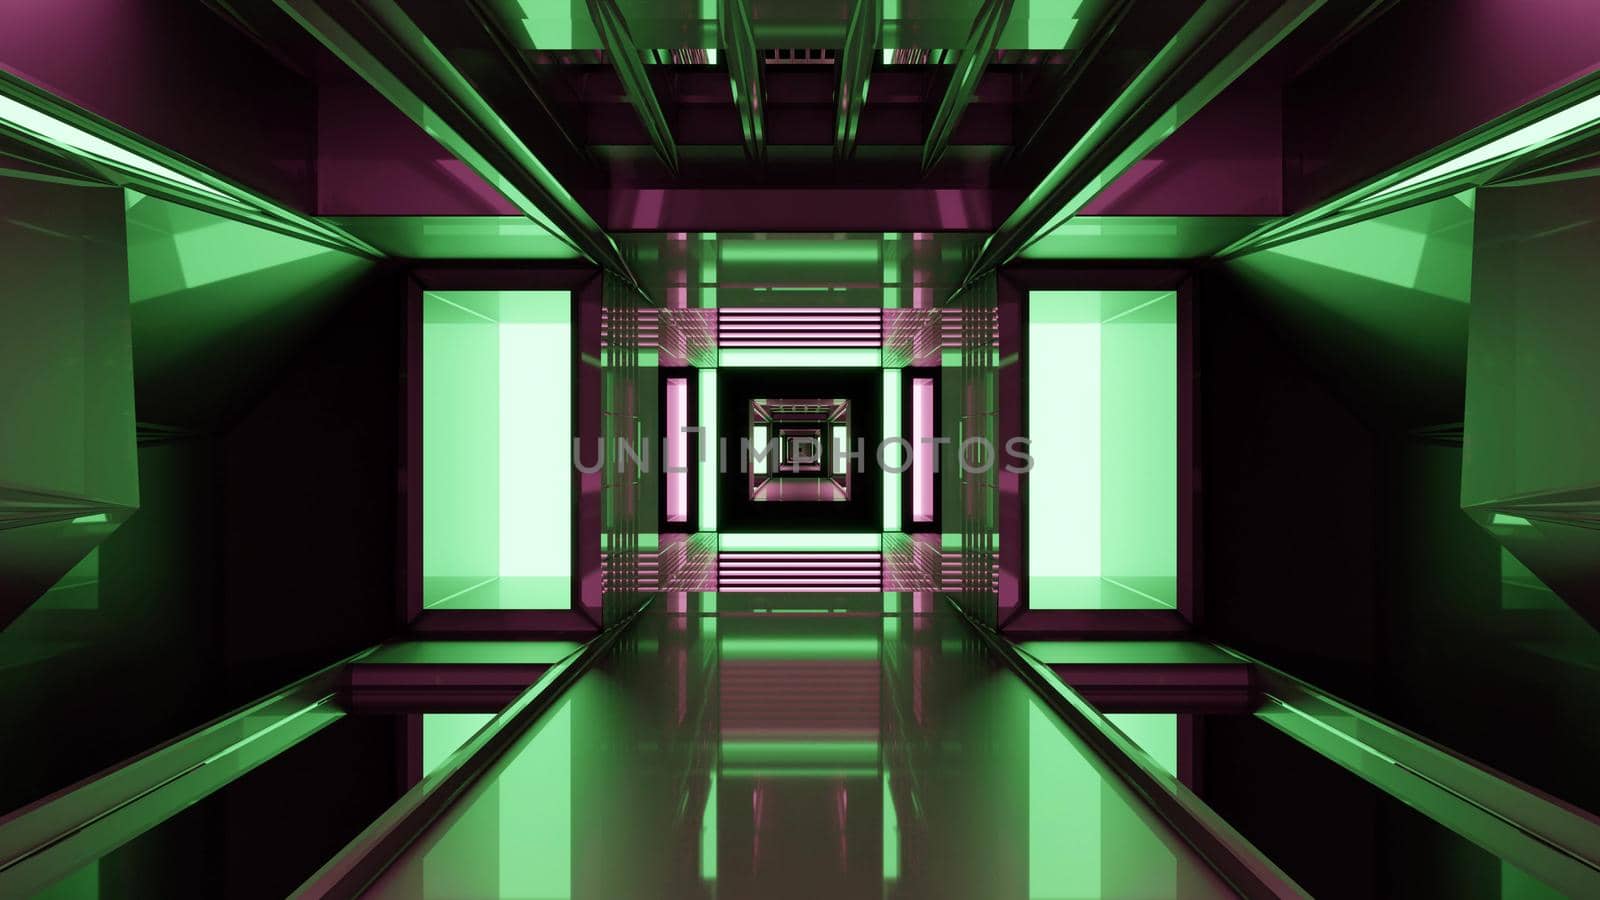 Abstract 3D illustration of 4K UHD modern tunnel with doorway and glass walls with green illumination and creative futuristic design